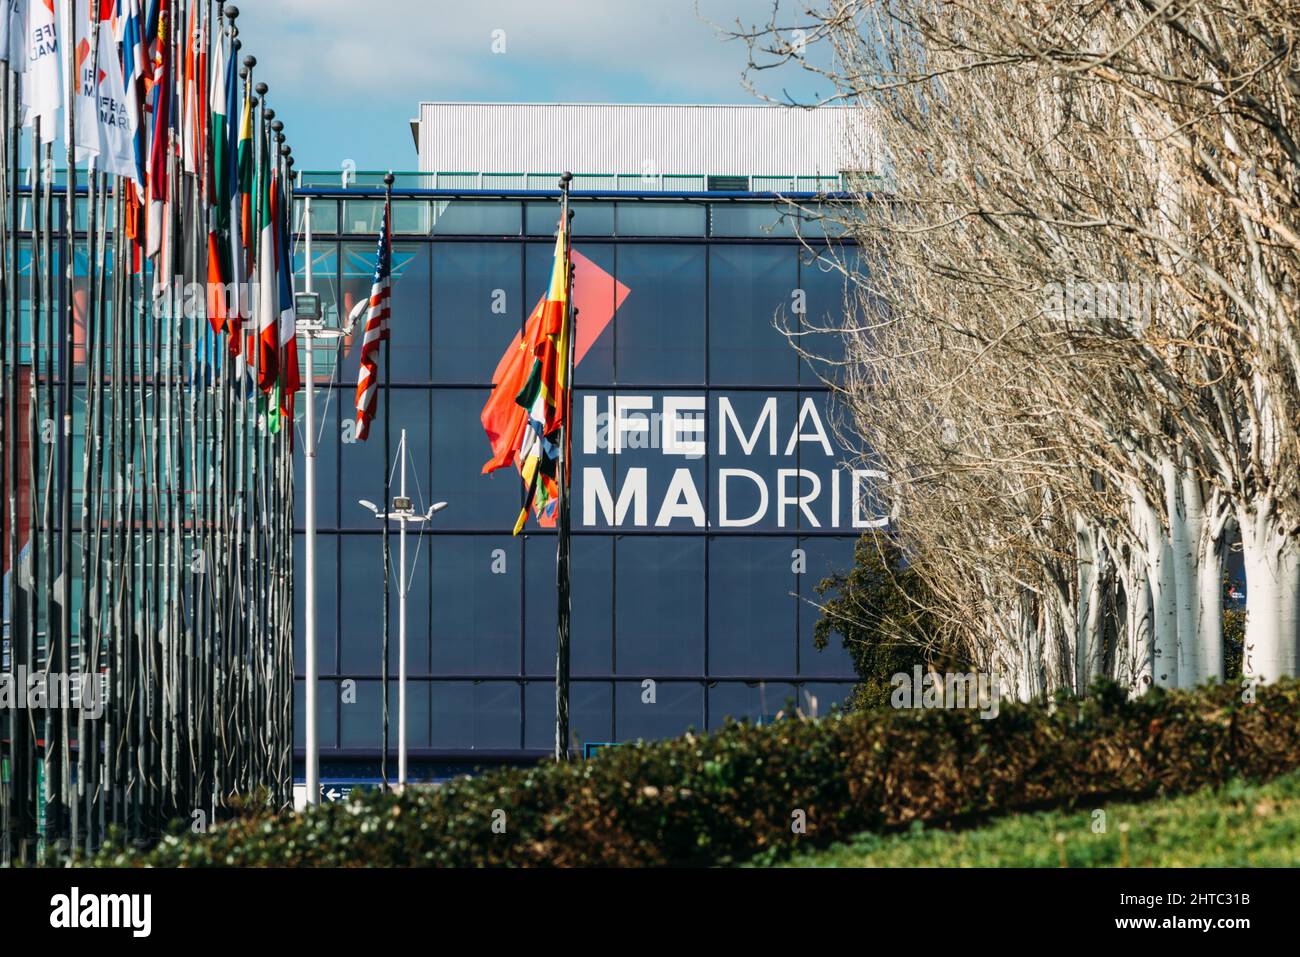 Madrid, Spain - February 27, 2022: Ifema is an entity charged with the organisation of fairs, halls and congresses in their facilities in Madrid. Stock Photo